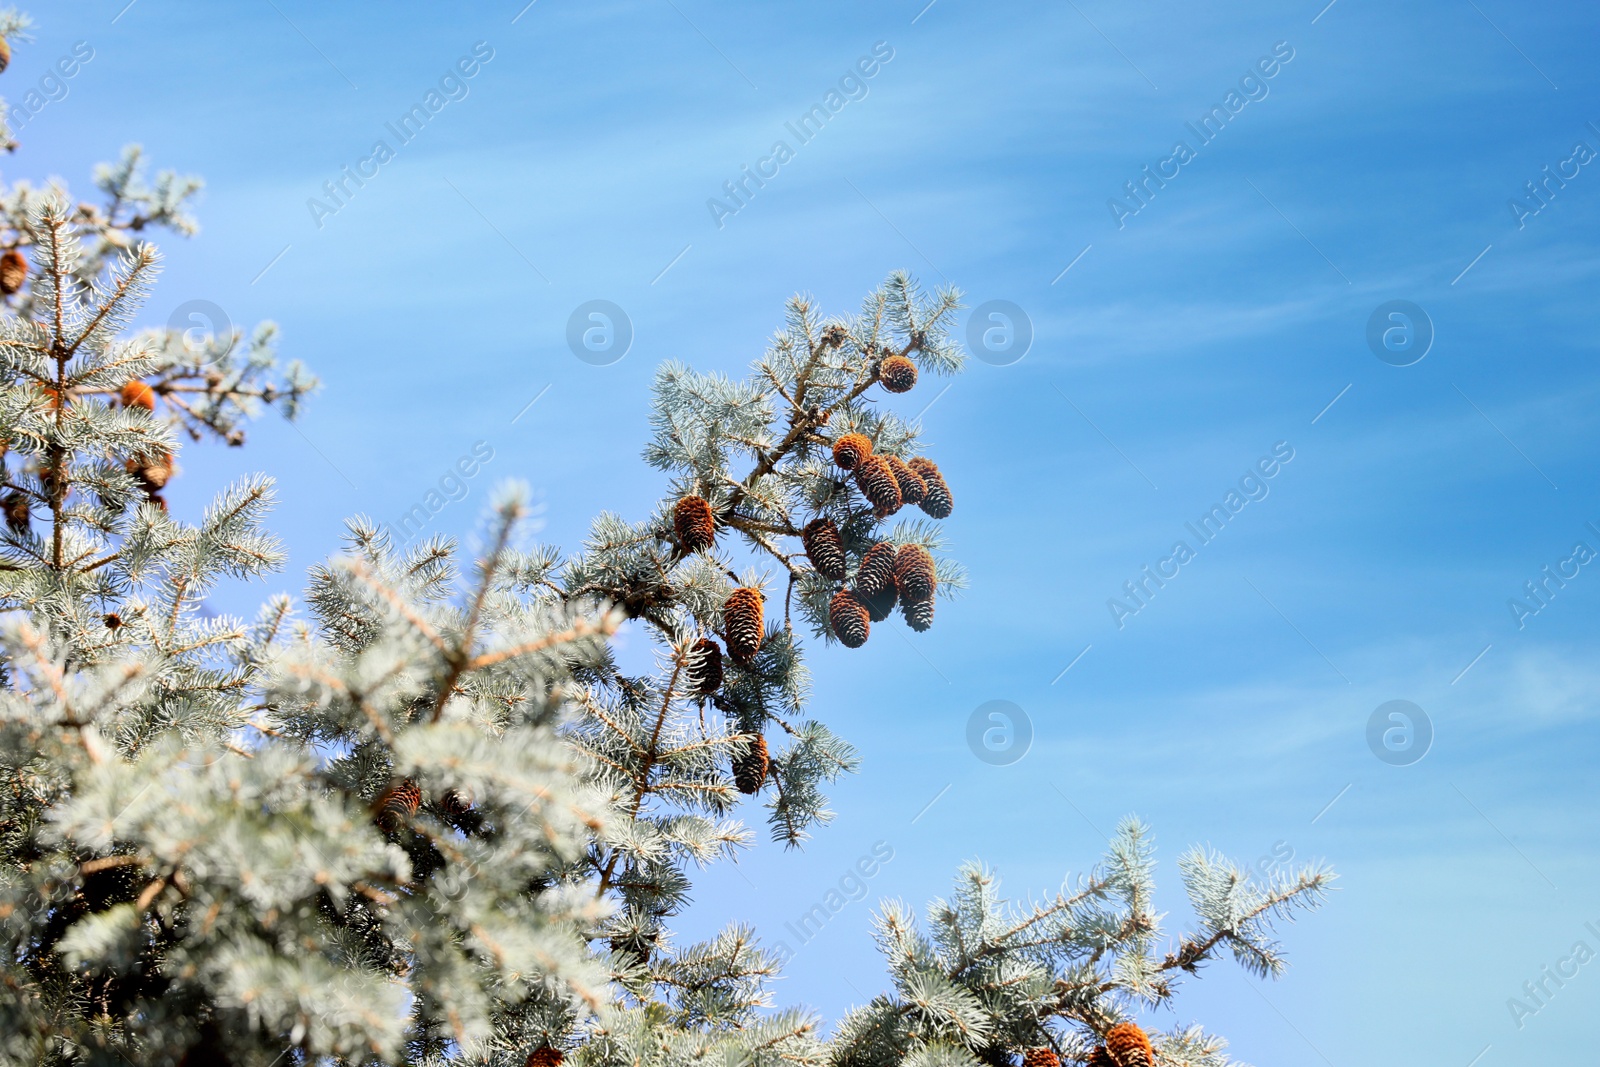 Photo of Beautiful cones growing on pine branches outdoors